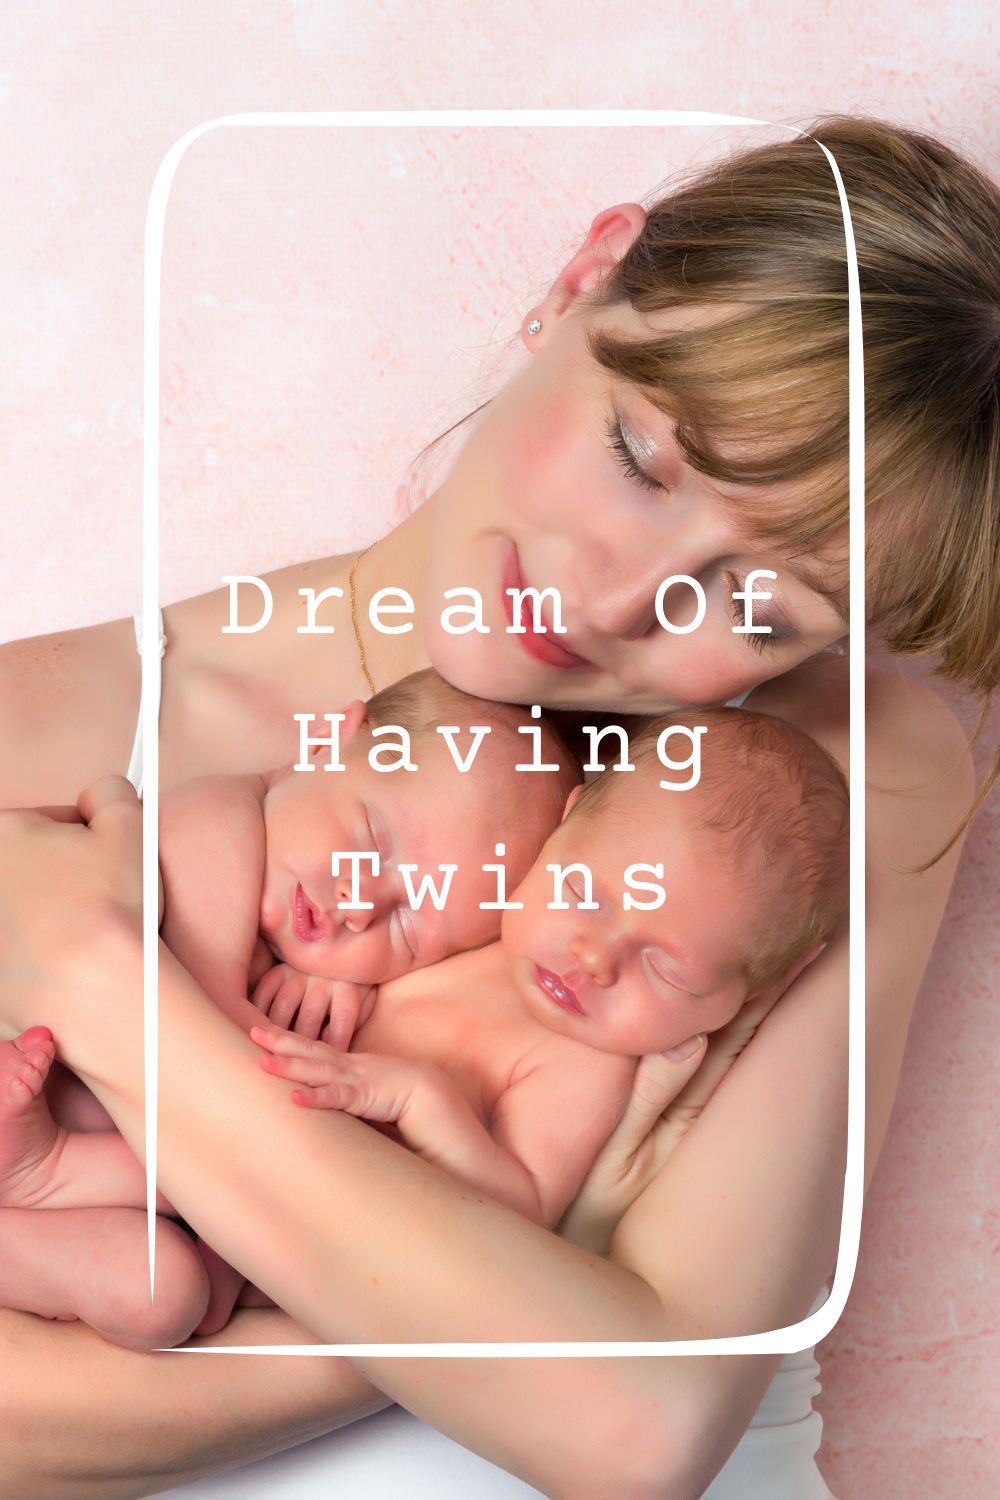 Dream Of Having Twins Meanings 1